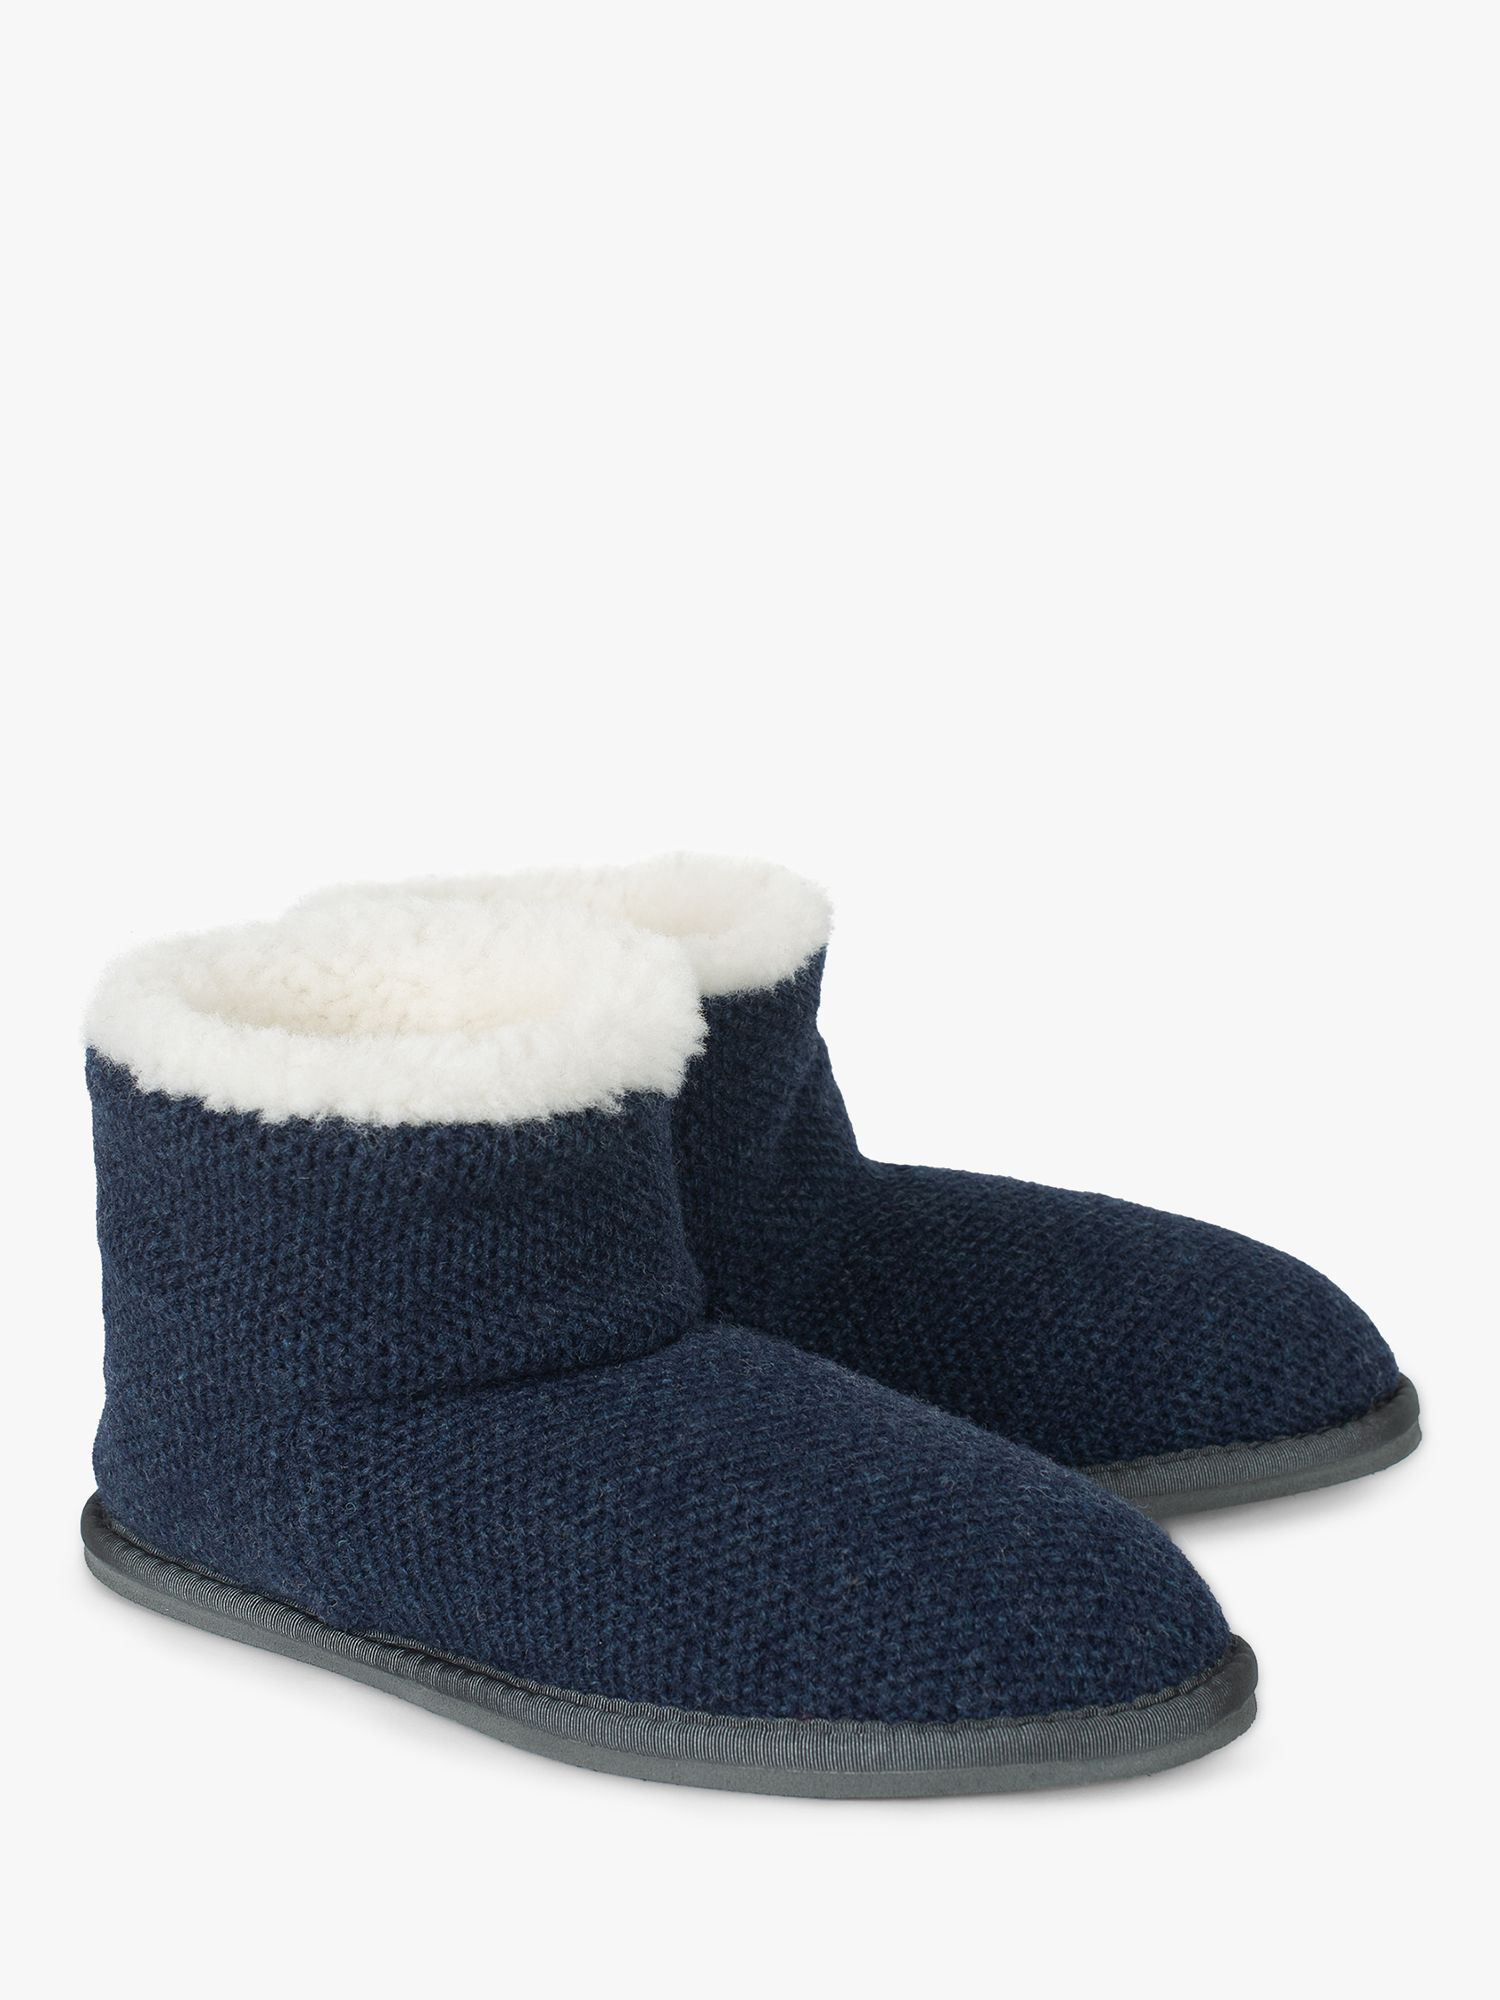 Celtic & Co. Knitted Boot Slippers, Navy at John Lewis & Partners